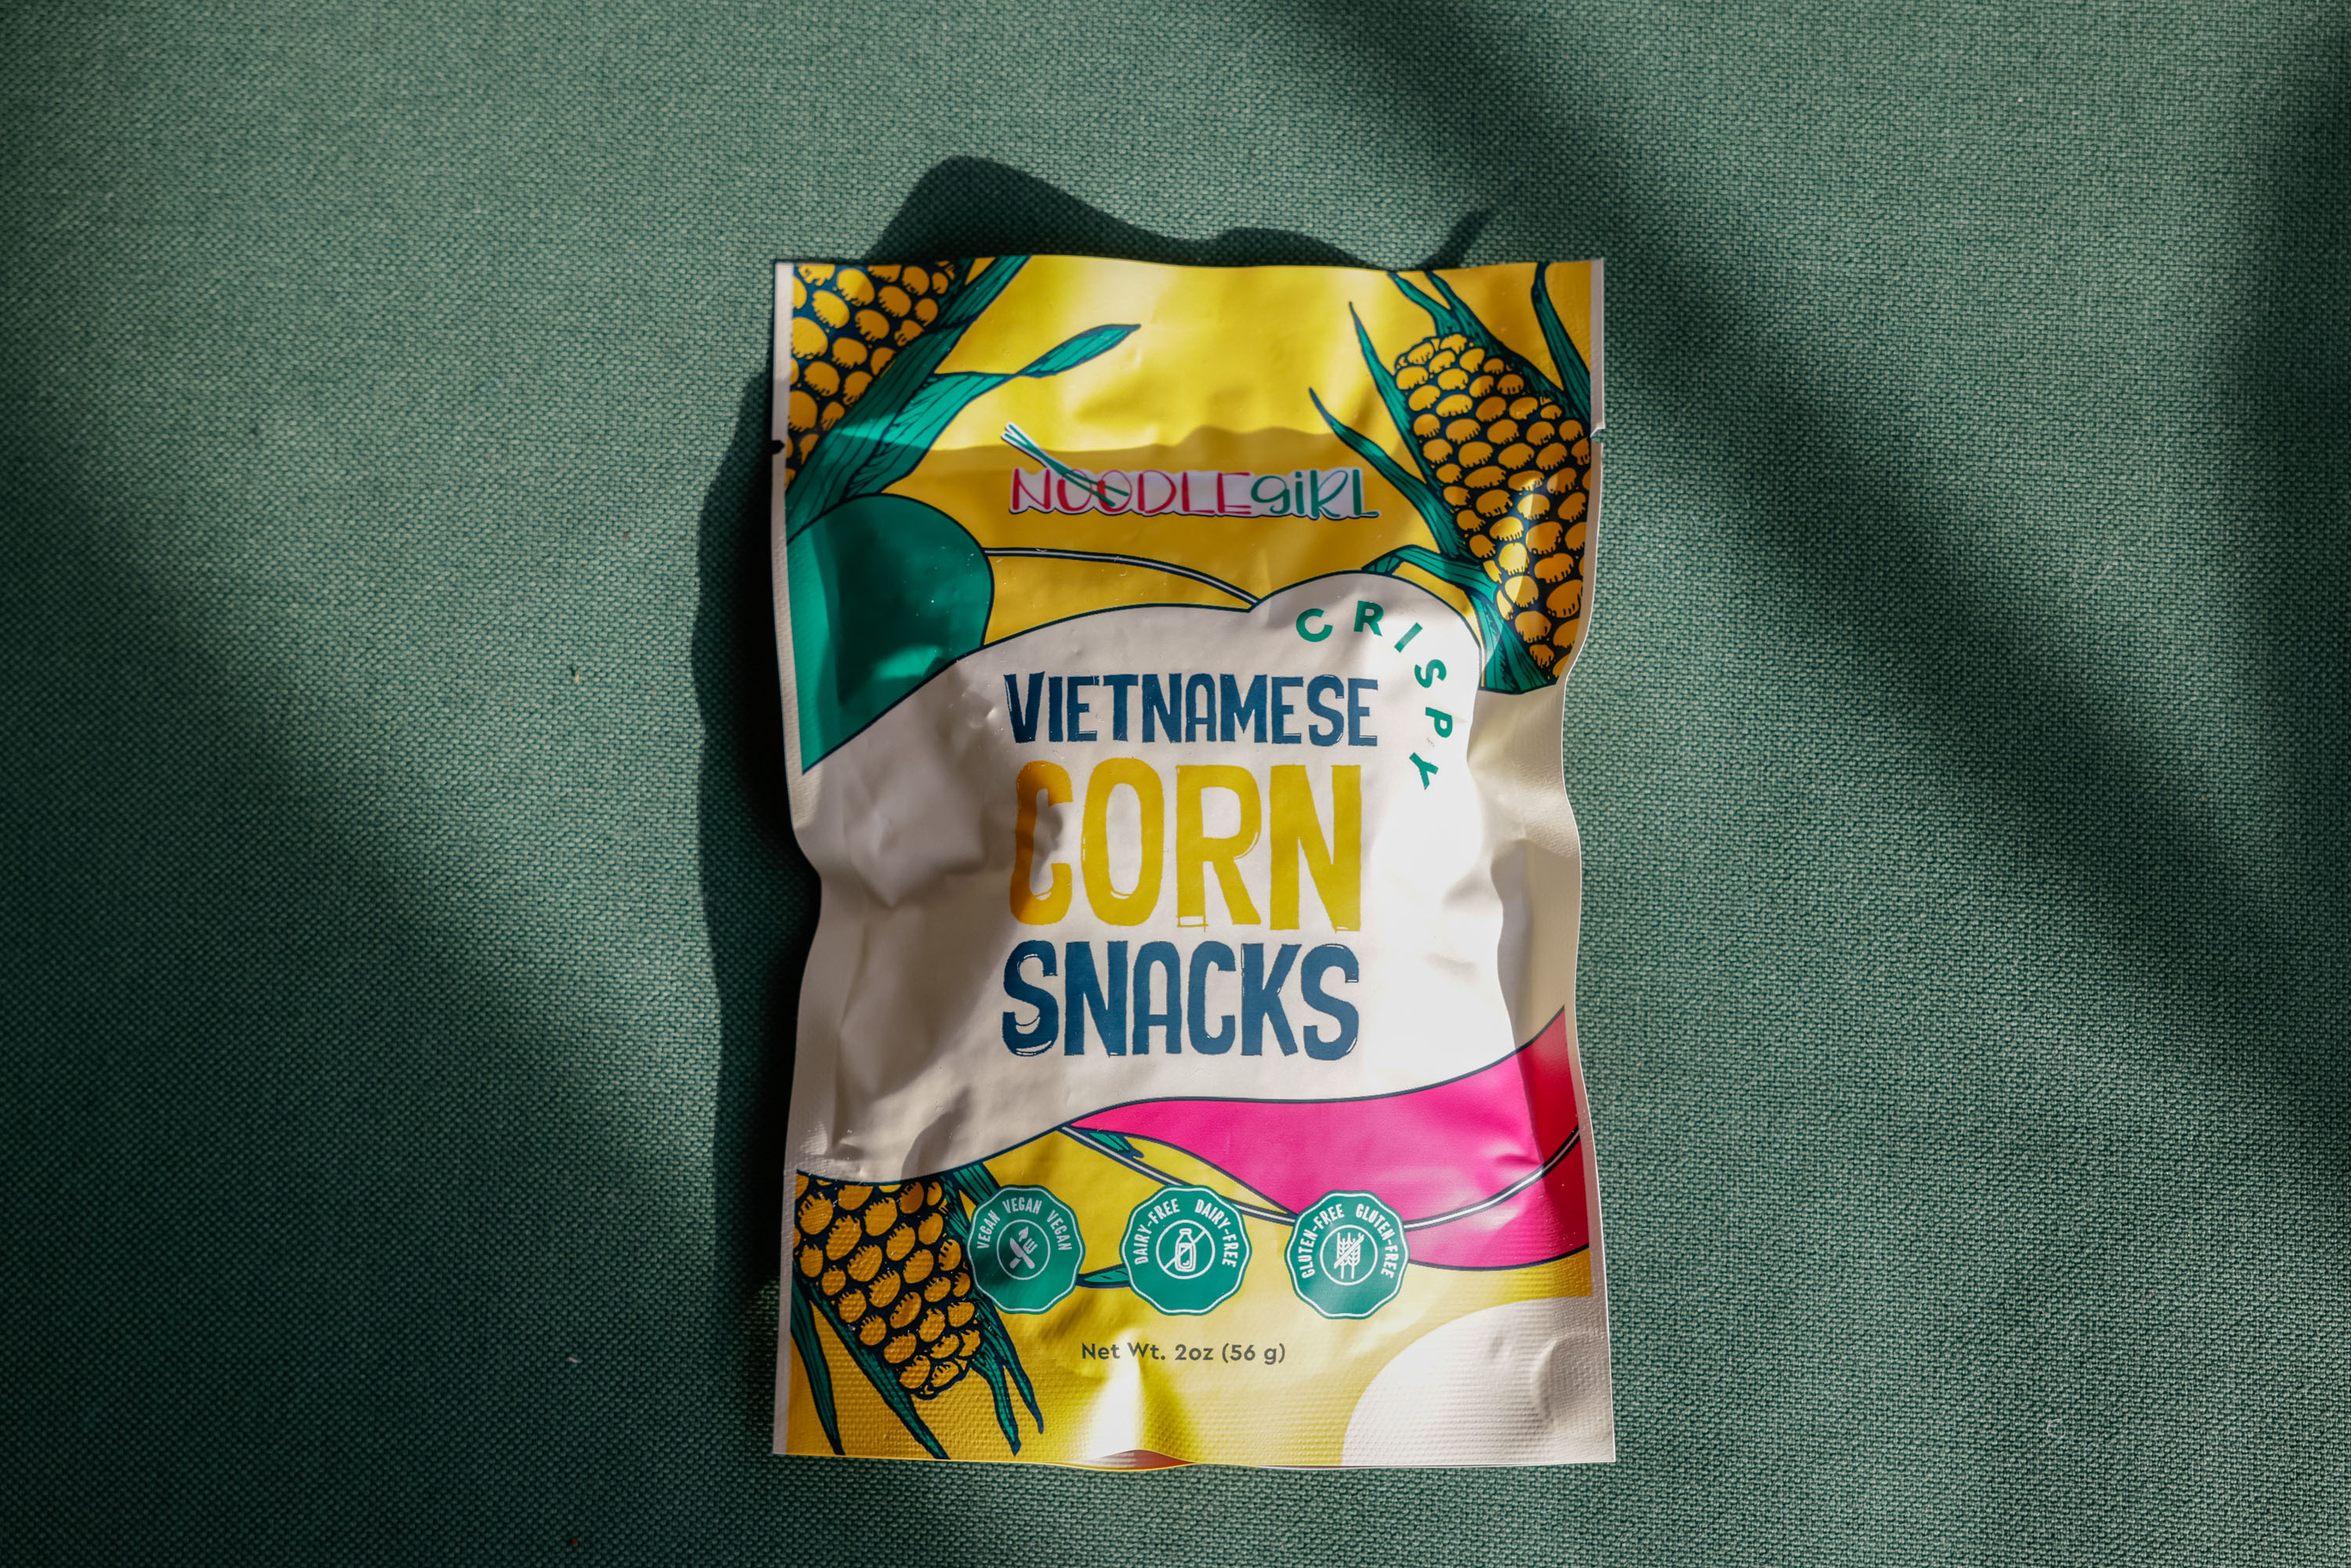 A top-down product shot of Noodle Girls Vietnamese Corn Snacks.